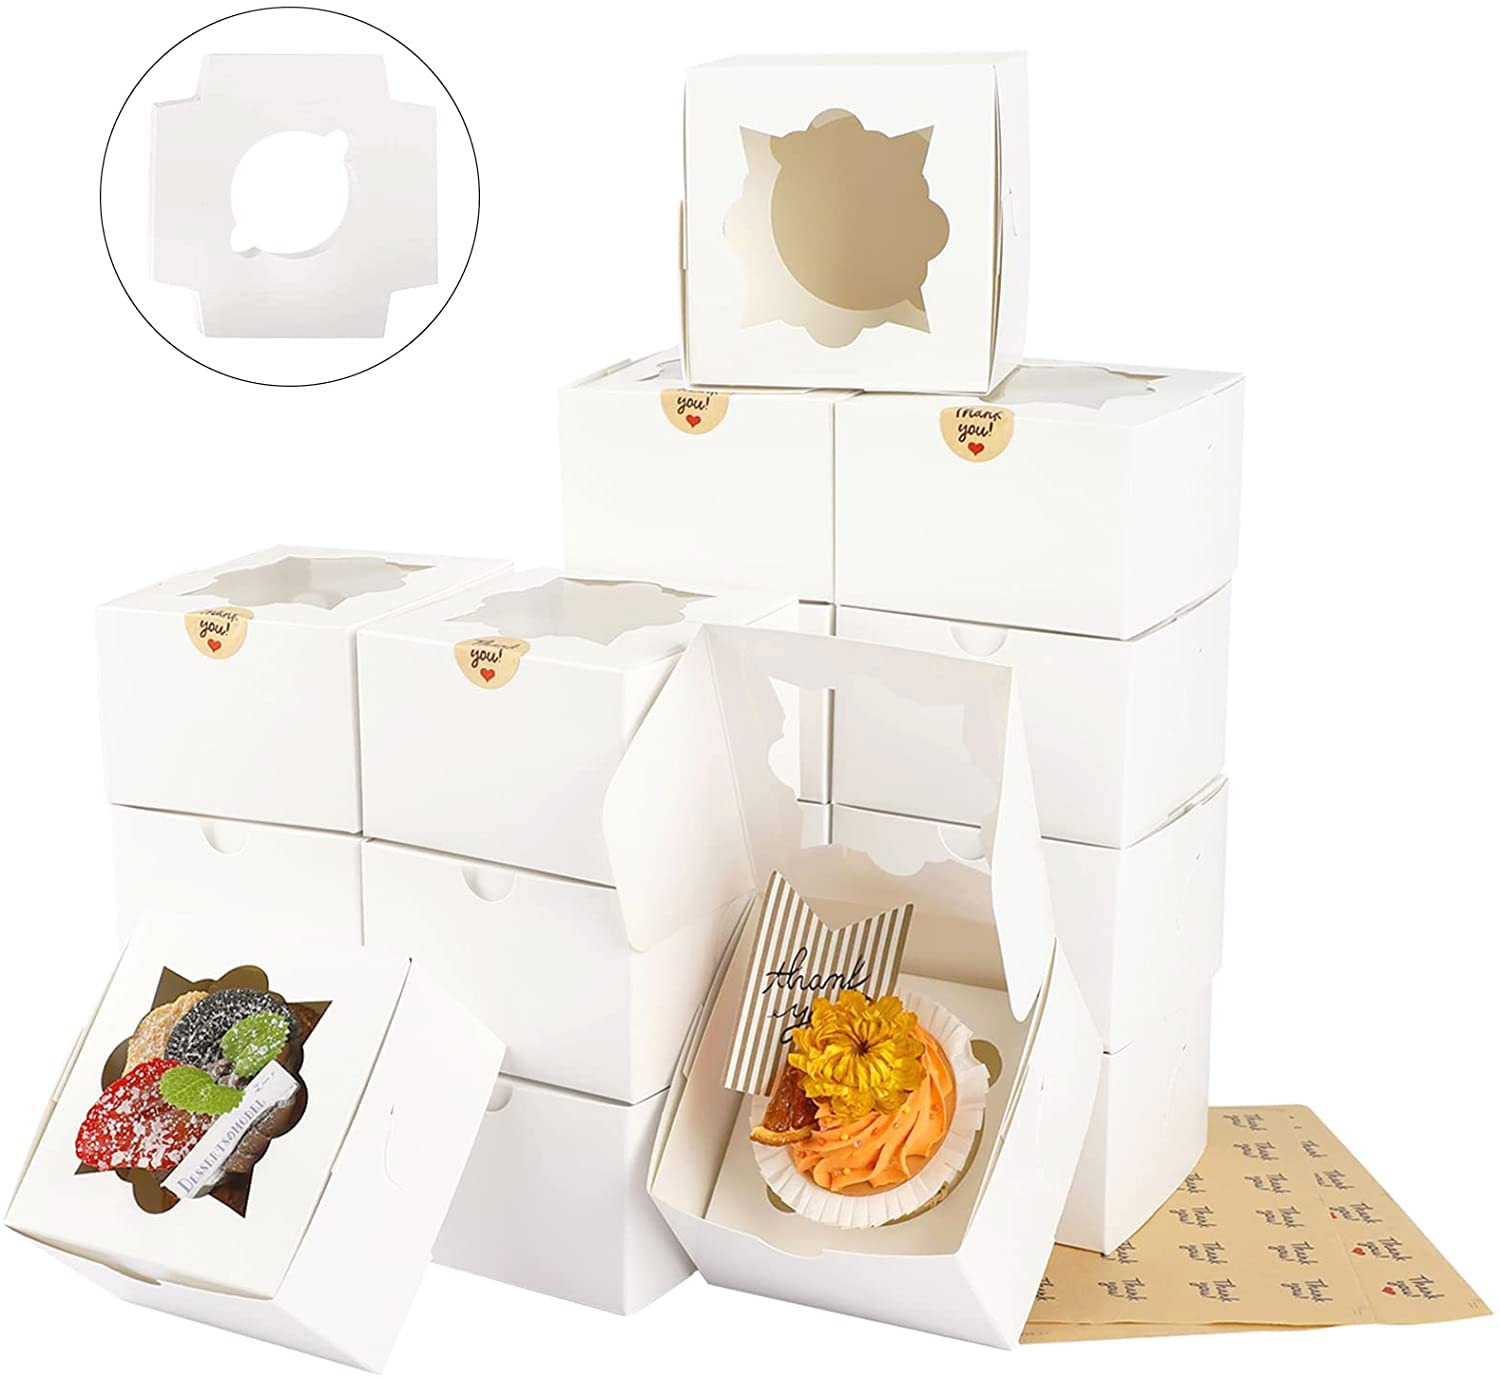 TOMNK 60pcs White Bakery Boxes with Window Cookie Boxes 4 inch Pastry Boxes for